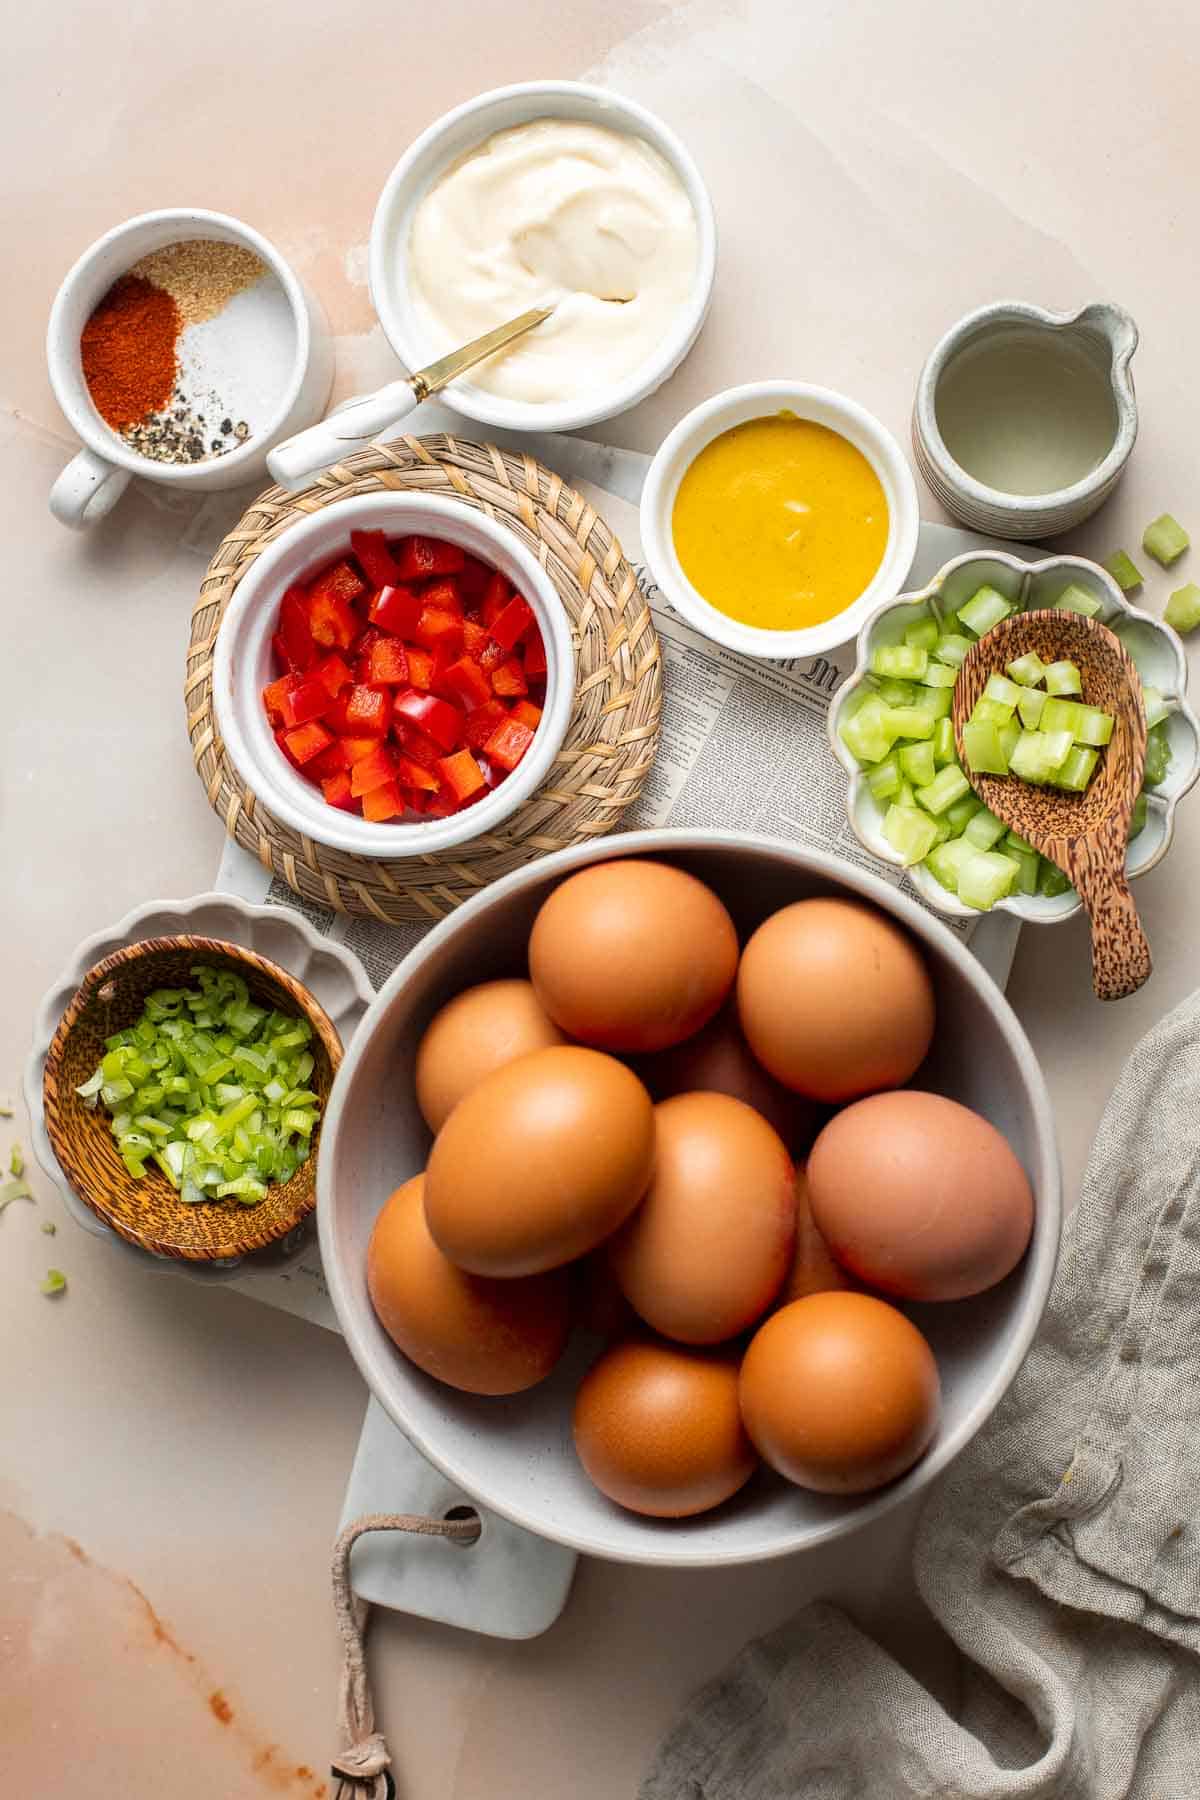 Deviled Egg Salad is the perfect spring side dish! It has the signature tang and smokiness of deviled eggs with the pillowy texture of egg salad. | aheadofthyme.com